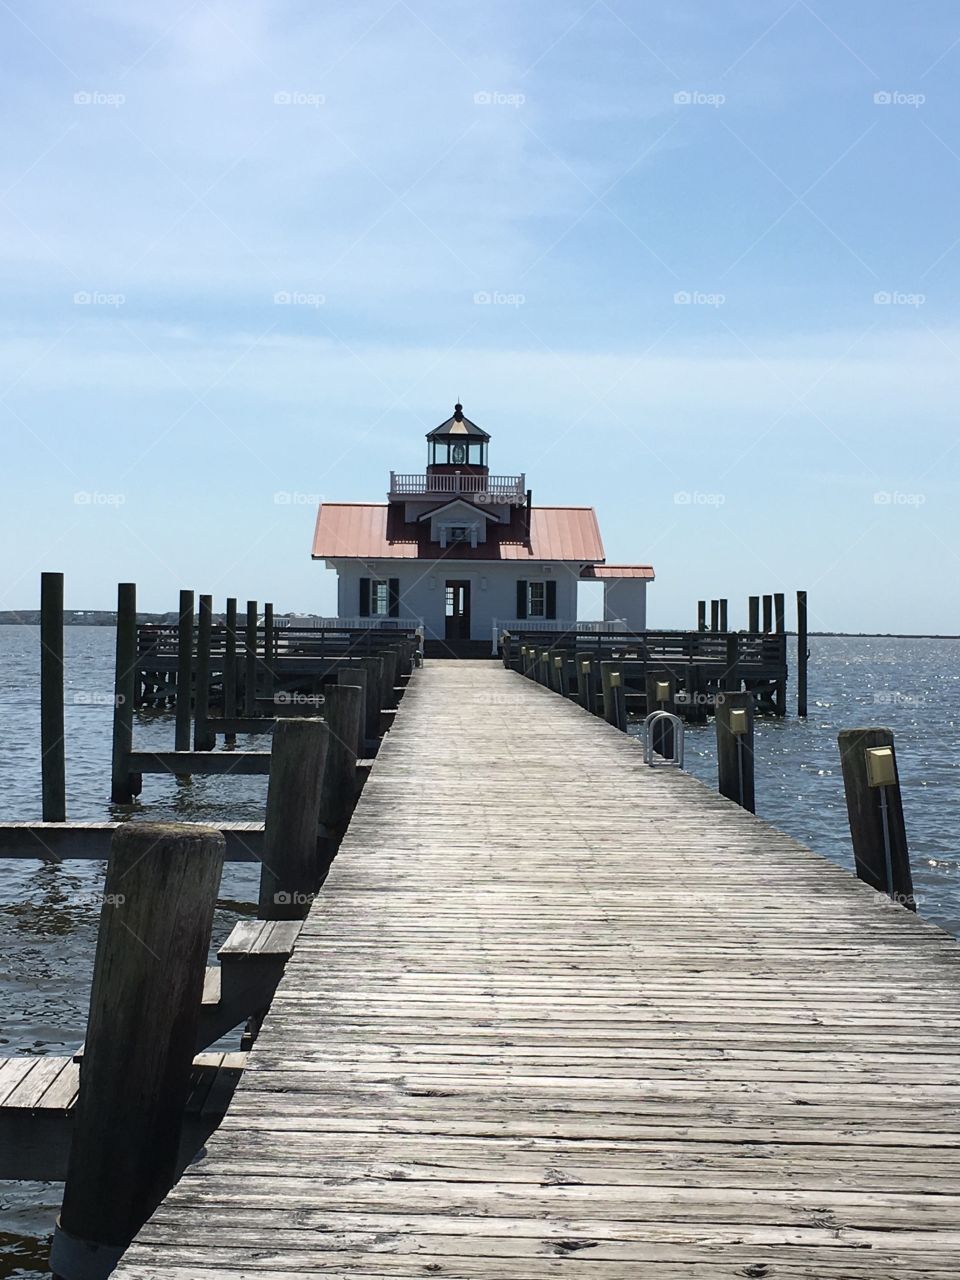 Roanoke Marshes Lighthouse on a beautiful day on the waterfront in Manteo, NC